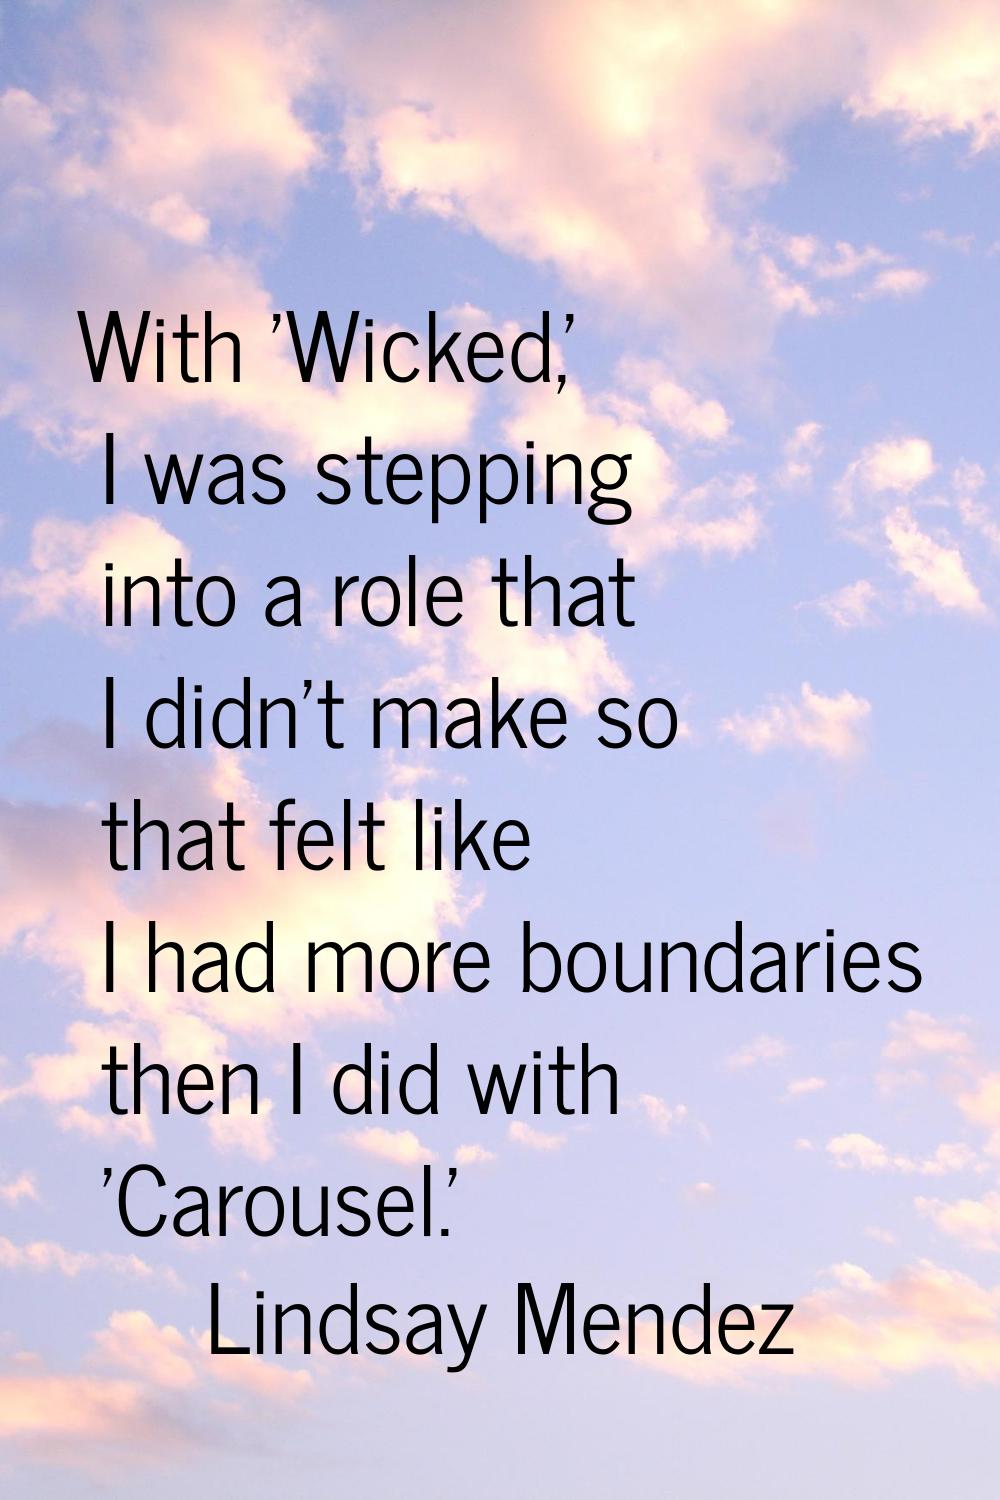 With 'Wicked,' I was stepping into a role that I didn't make so that felt like I had more boundarie